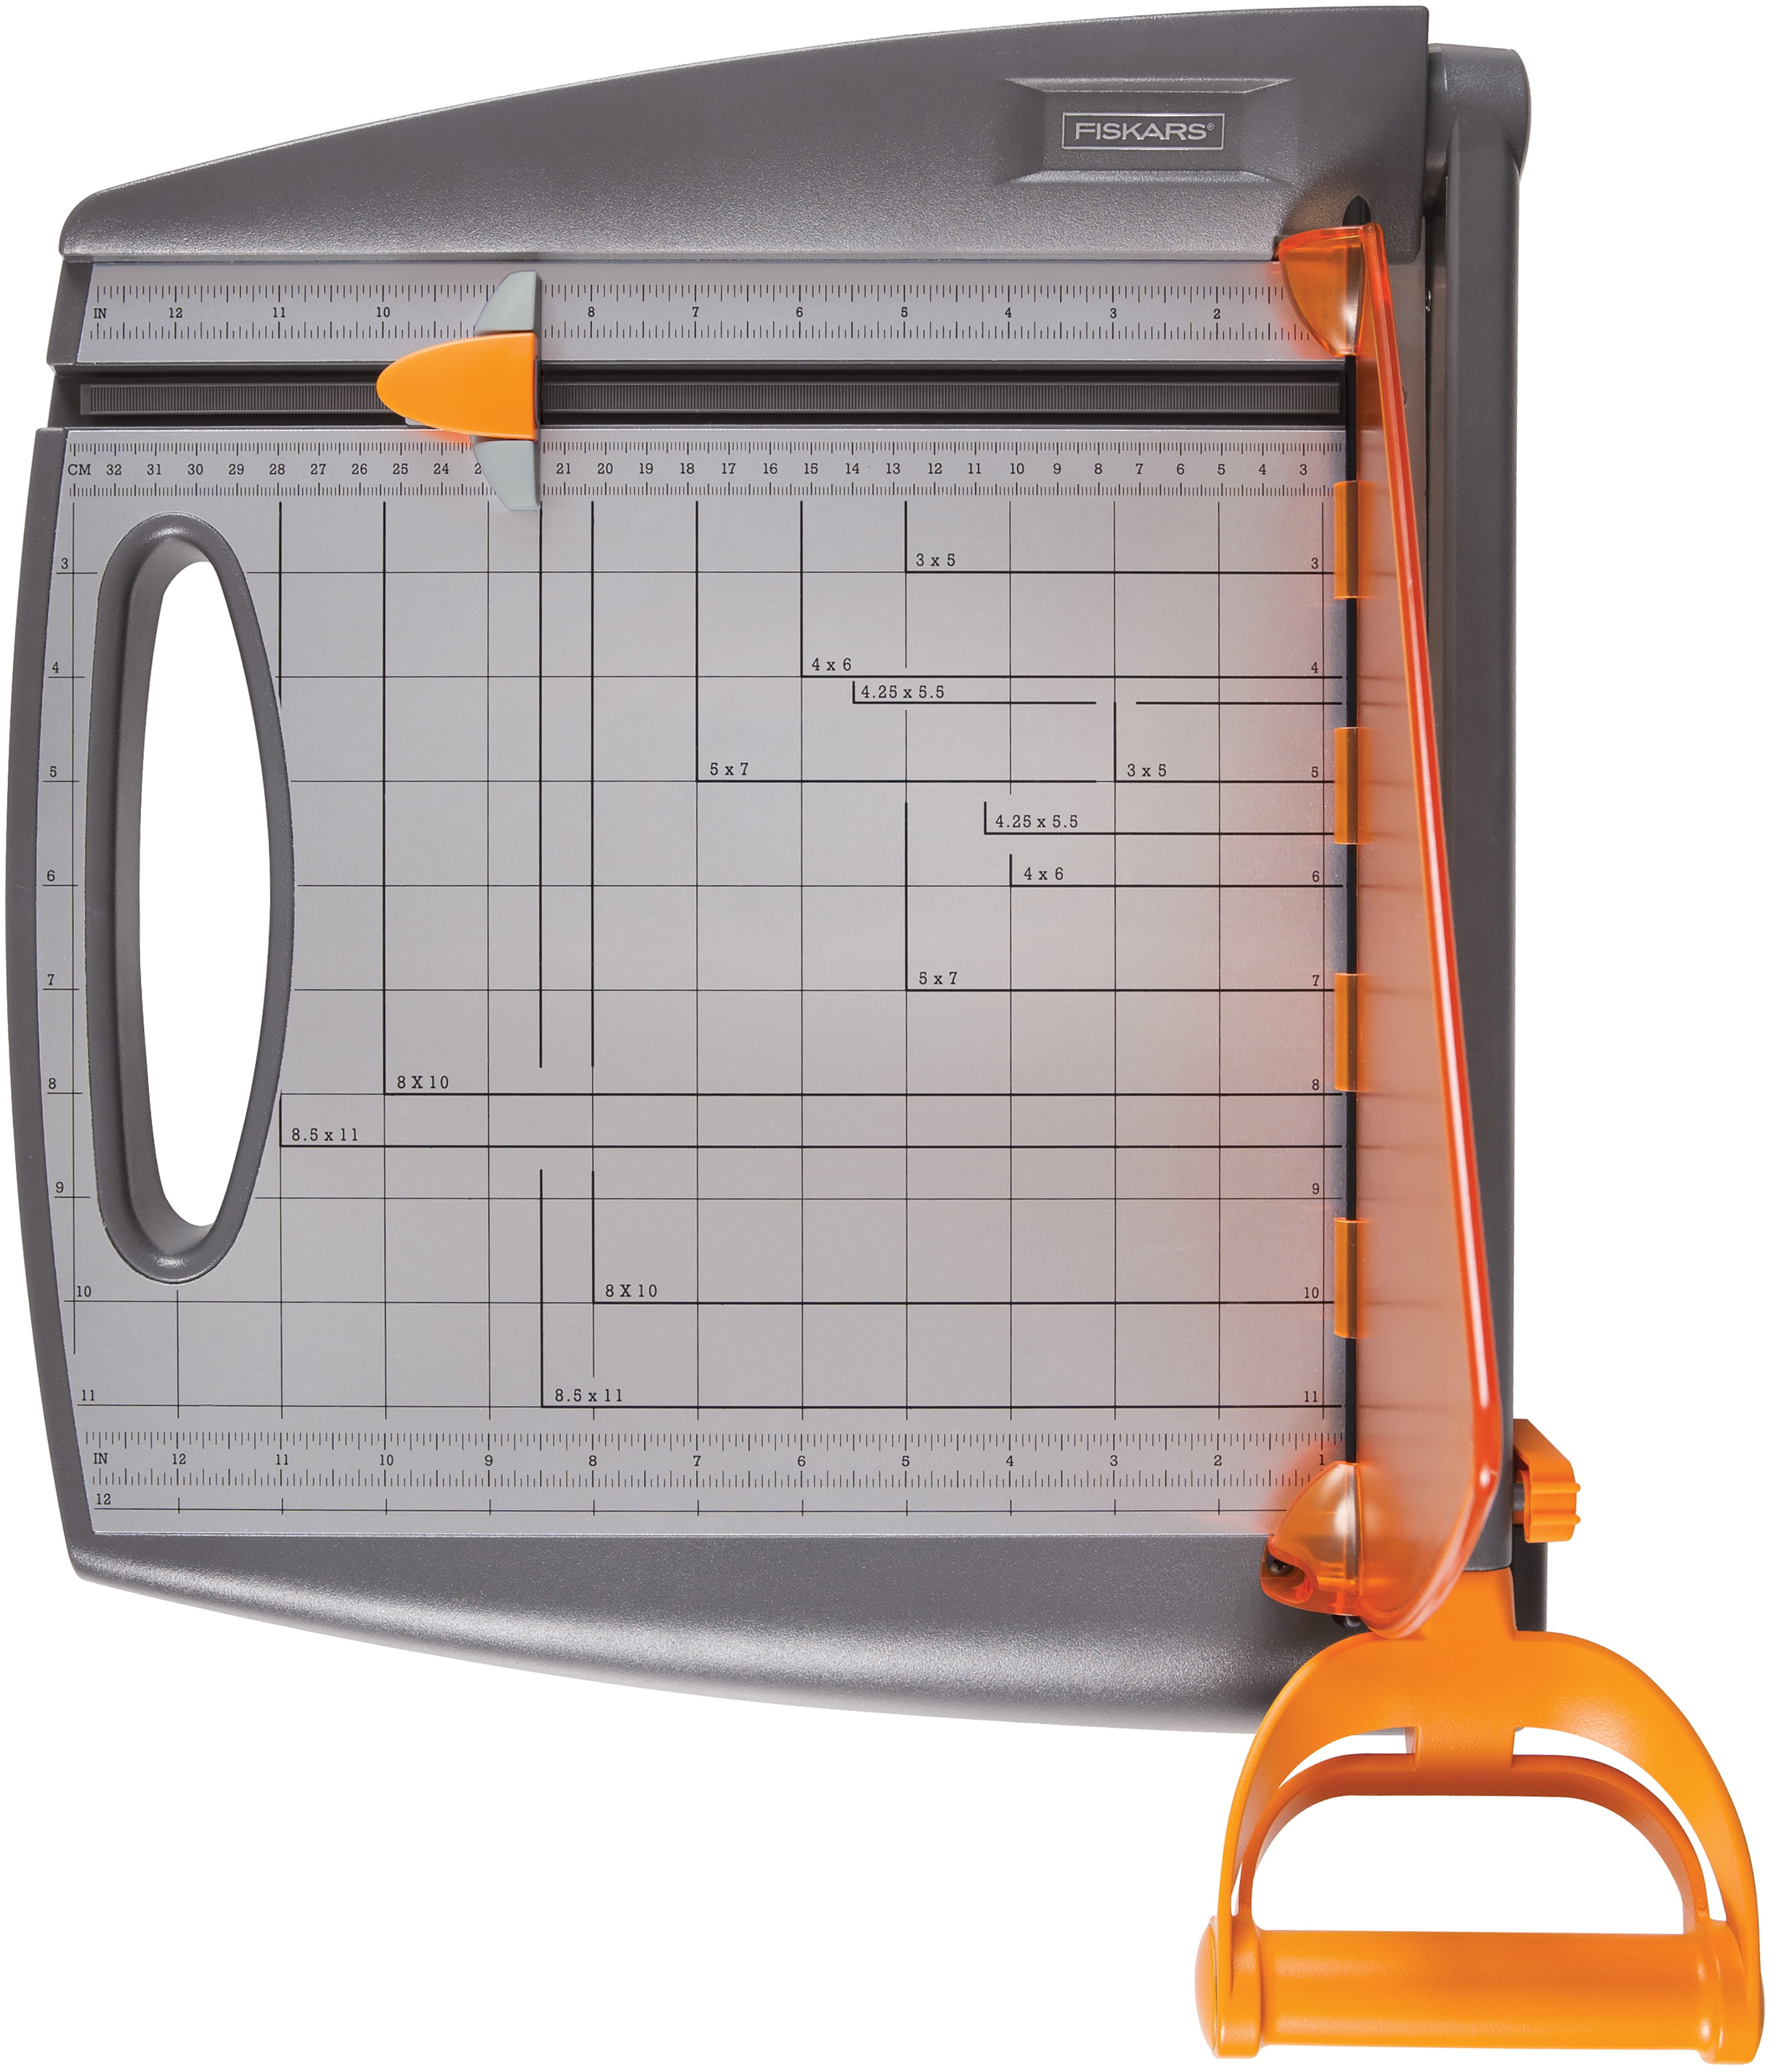 Fiskars Deluxe Scrapbooking Rotary Paper Trimmer VS Fiskars Procision  Rotary Bypass Trimmer 